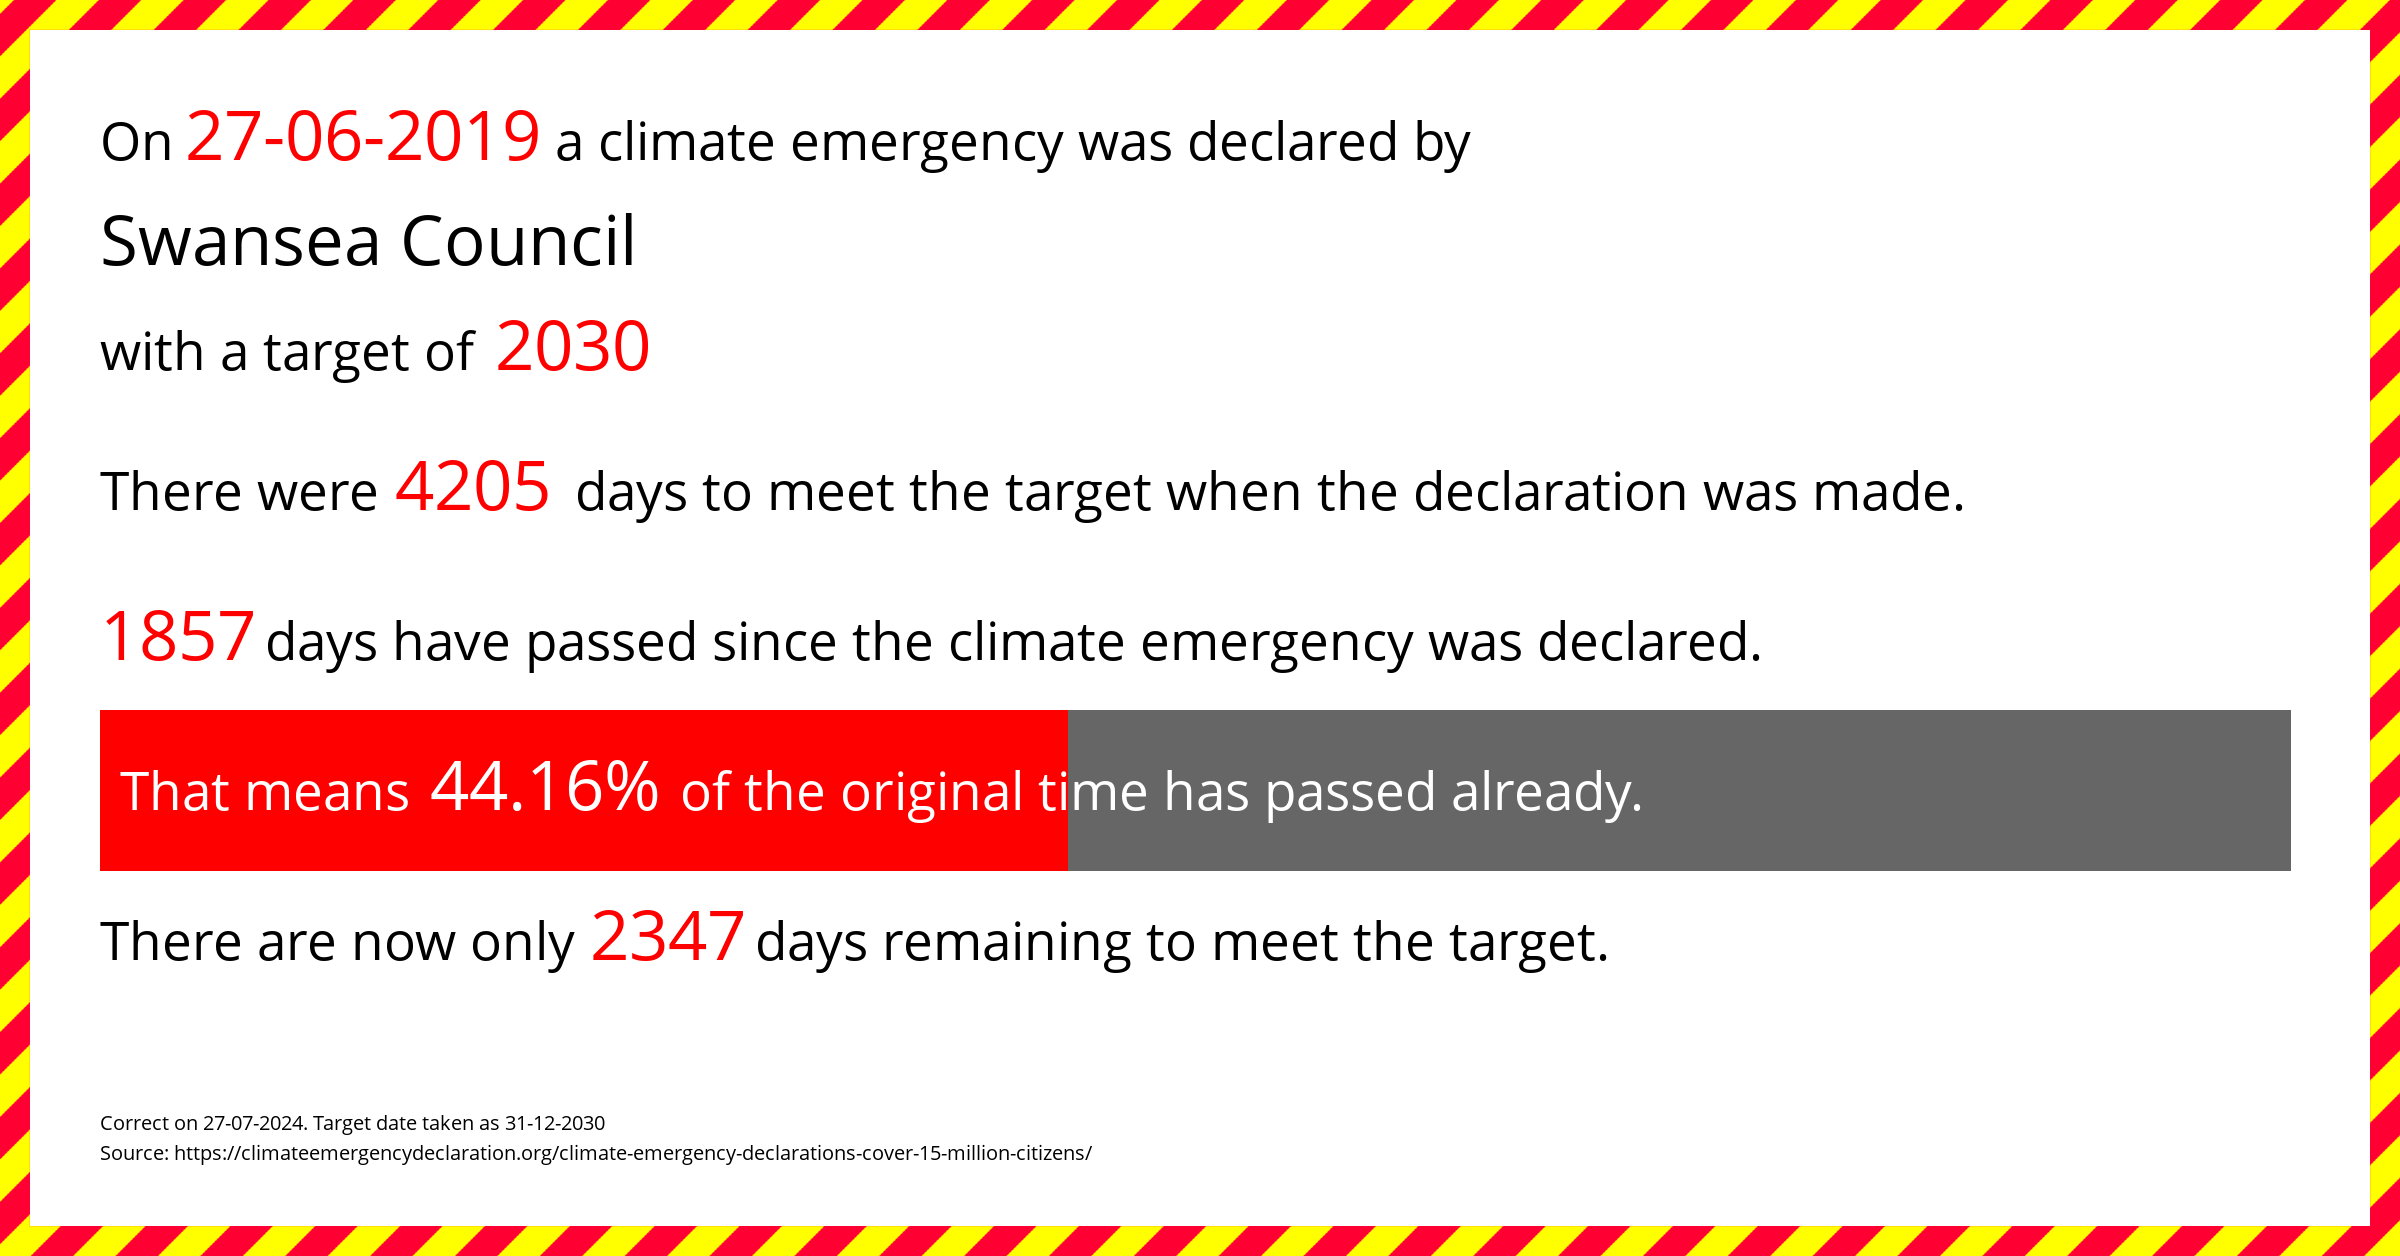 Swansea Council declared a Climate emergency on Thursday 27th June 2019, with a target of 2030.